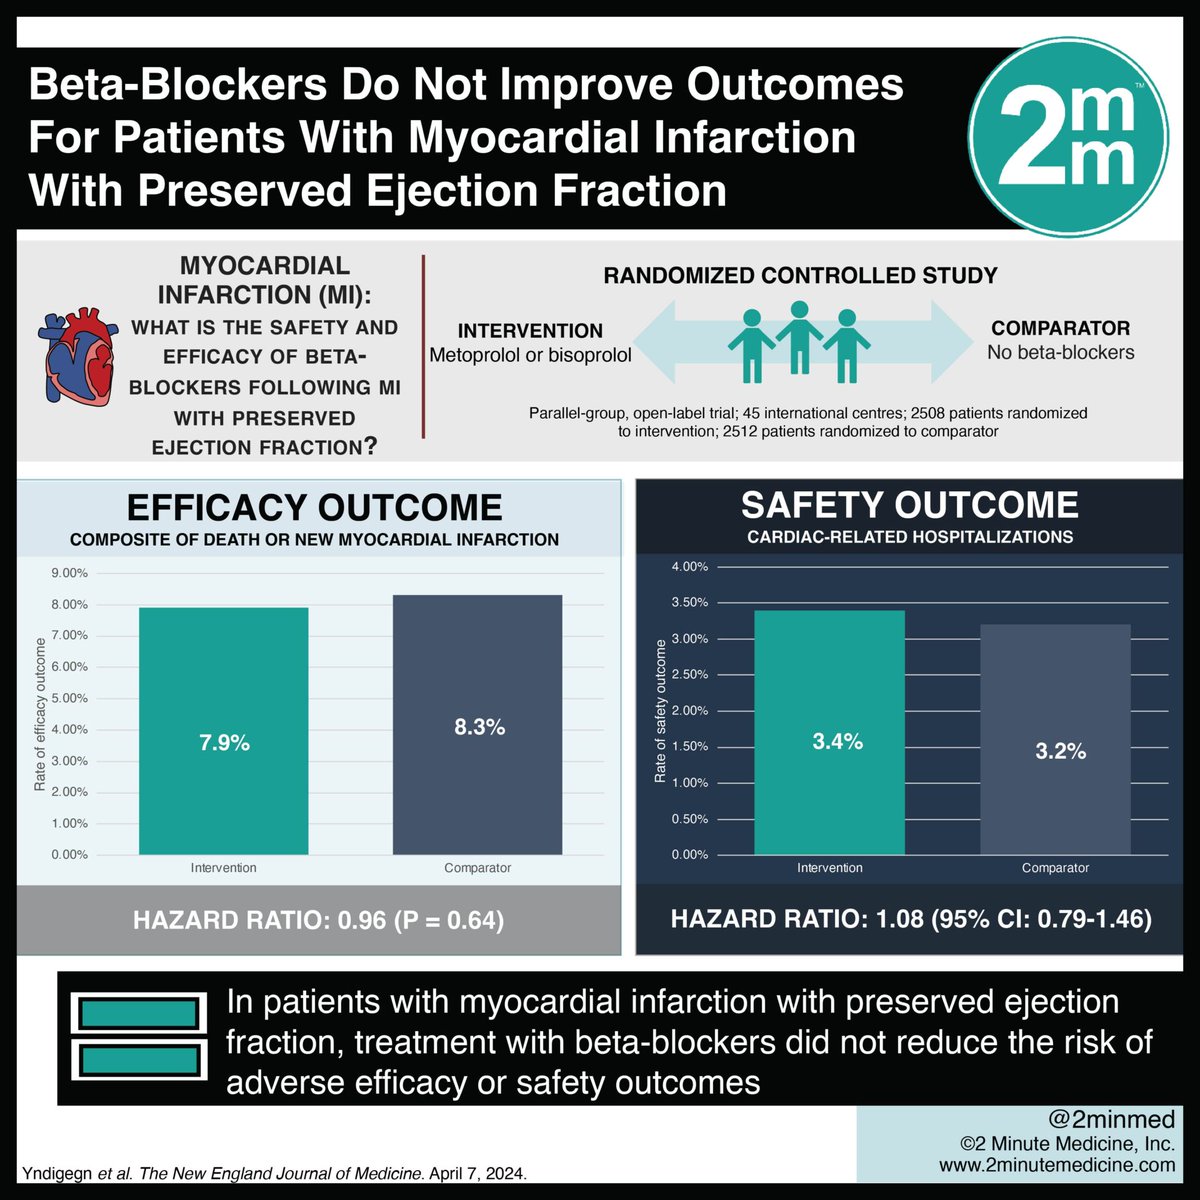 #VisualAbstract: Beta-Blockers after Myocardial Infarction and Preserved Ejection Fraction dlvr.it/T6VCxk #StudyGraphics #betablocker